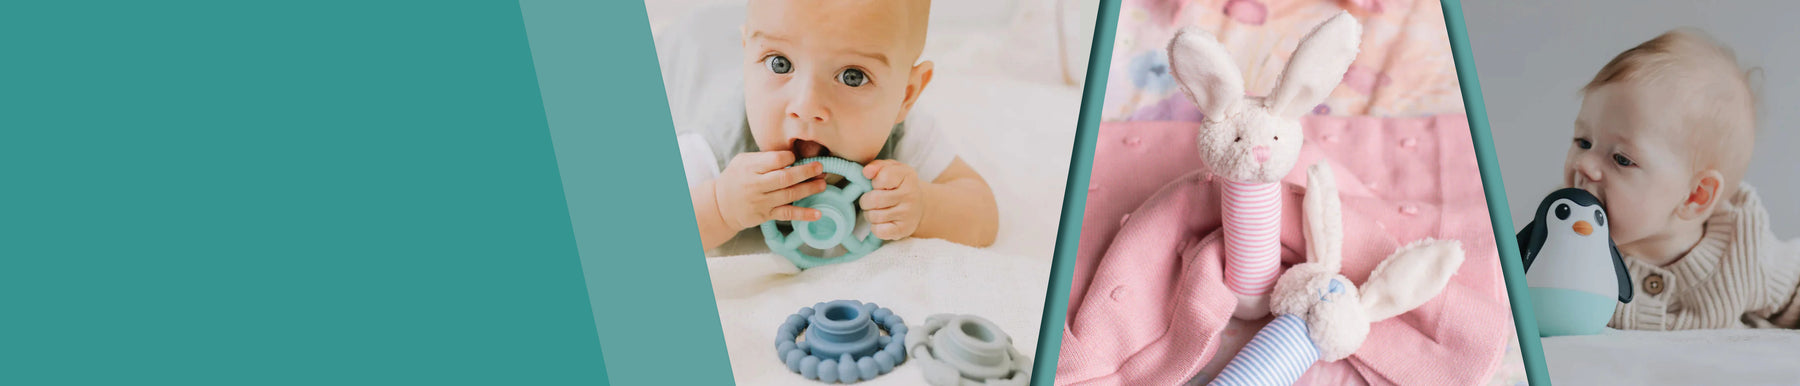 Cherrie Baby - Baby Toys. The perfect gifts for babies and toddlers to learn through play